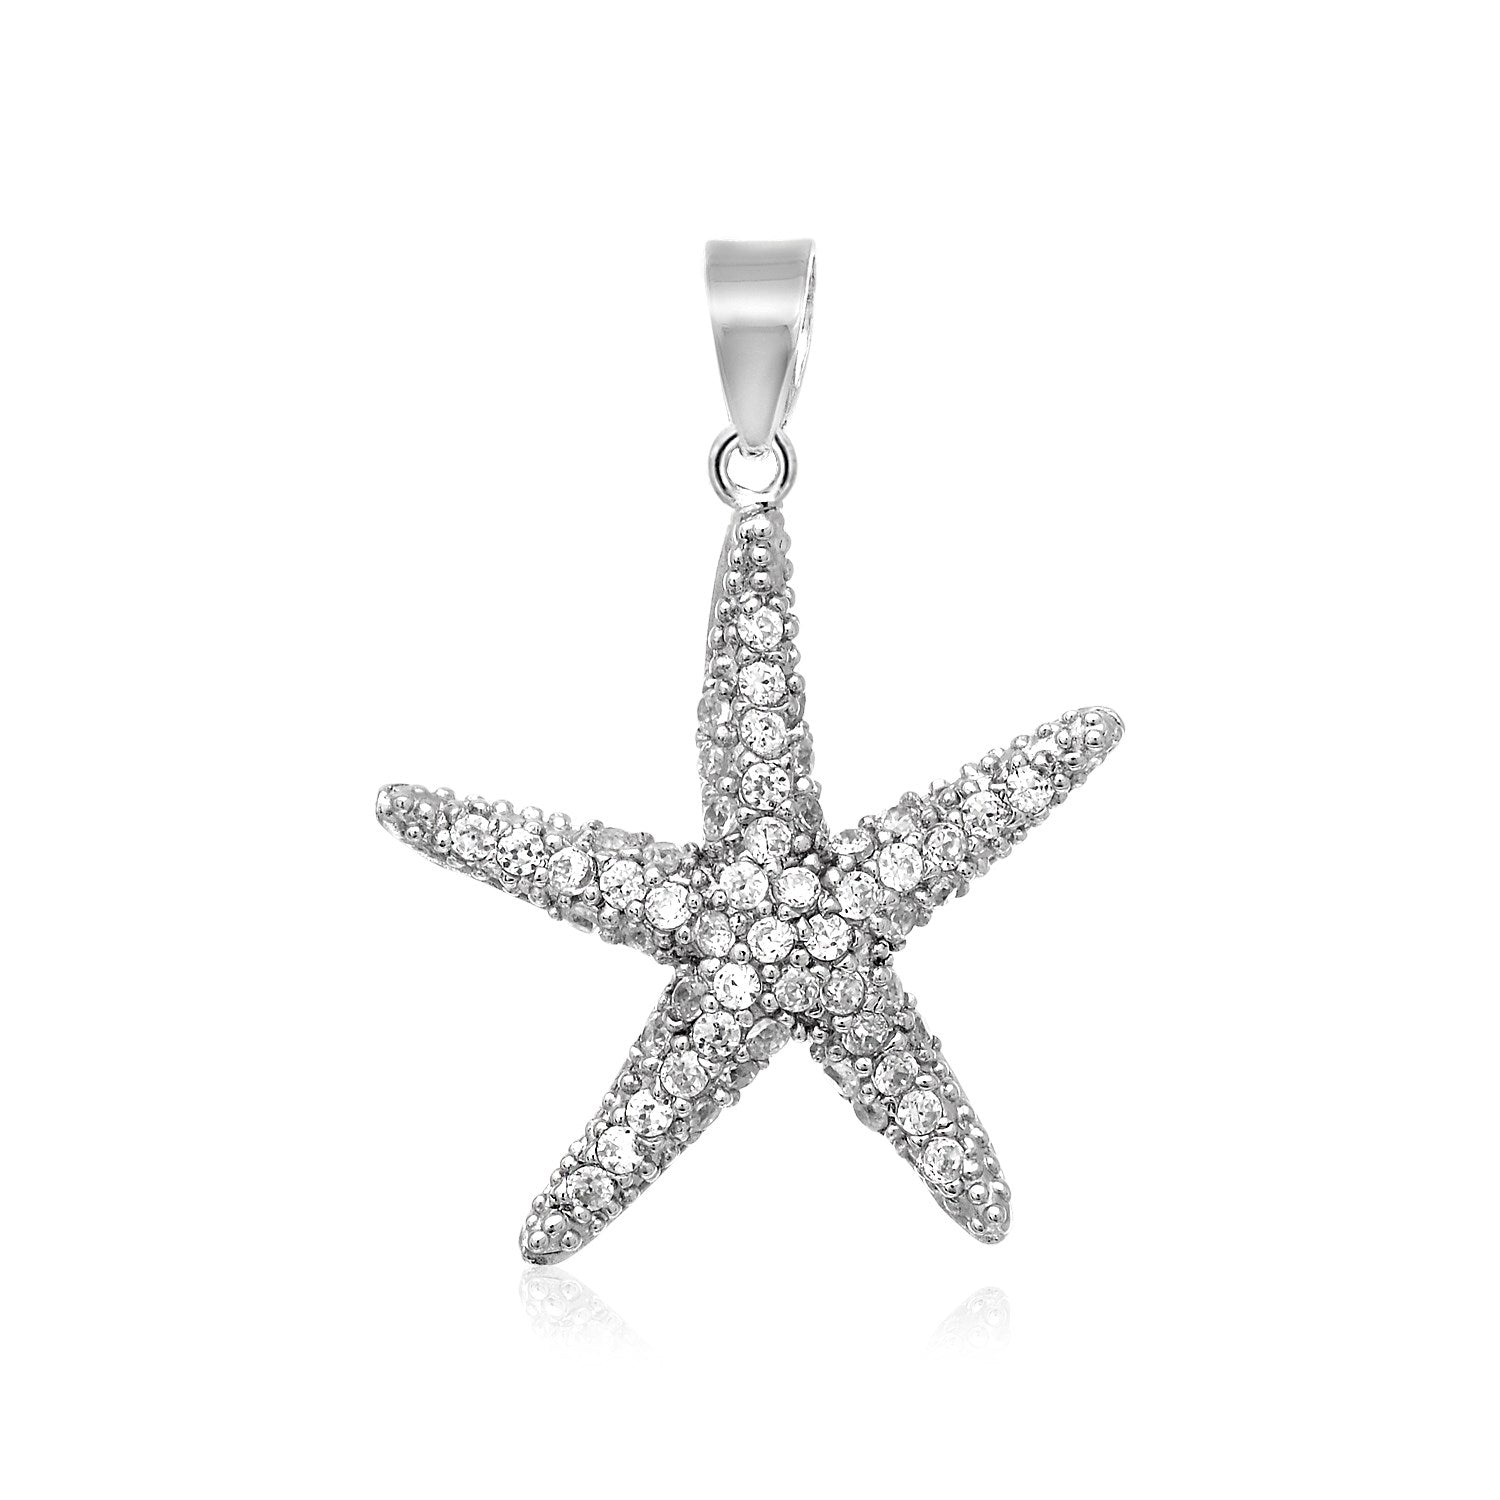 Sterling Silver Starfish Pendant with Cubic Zirconias